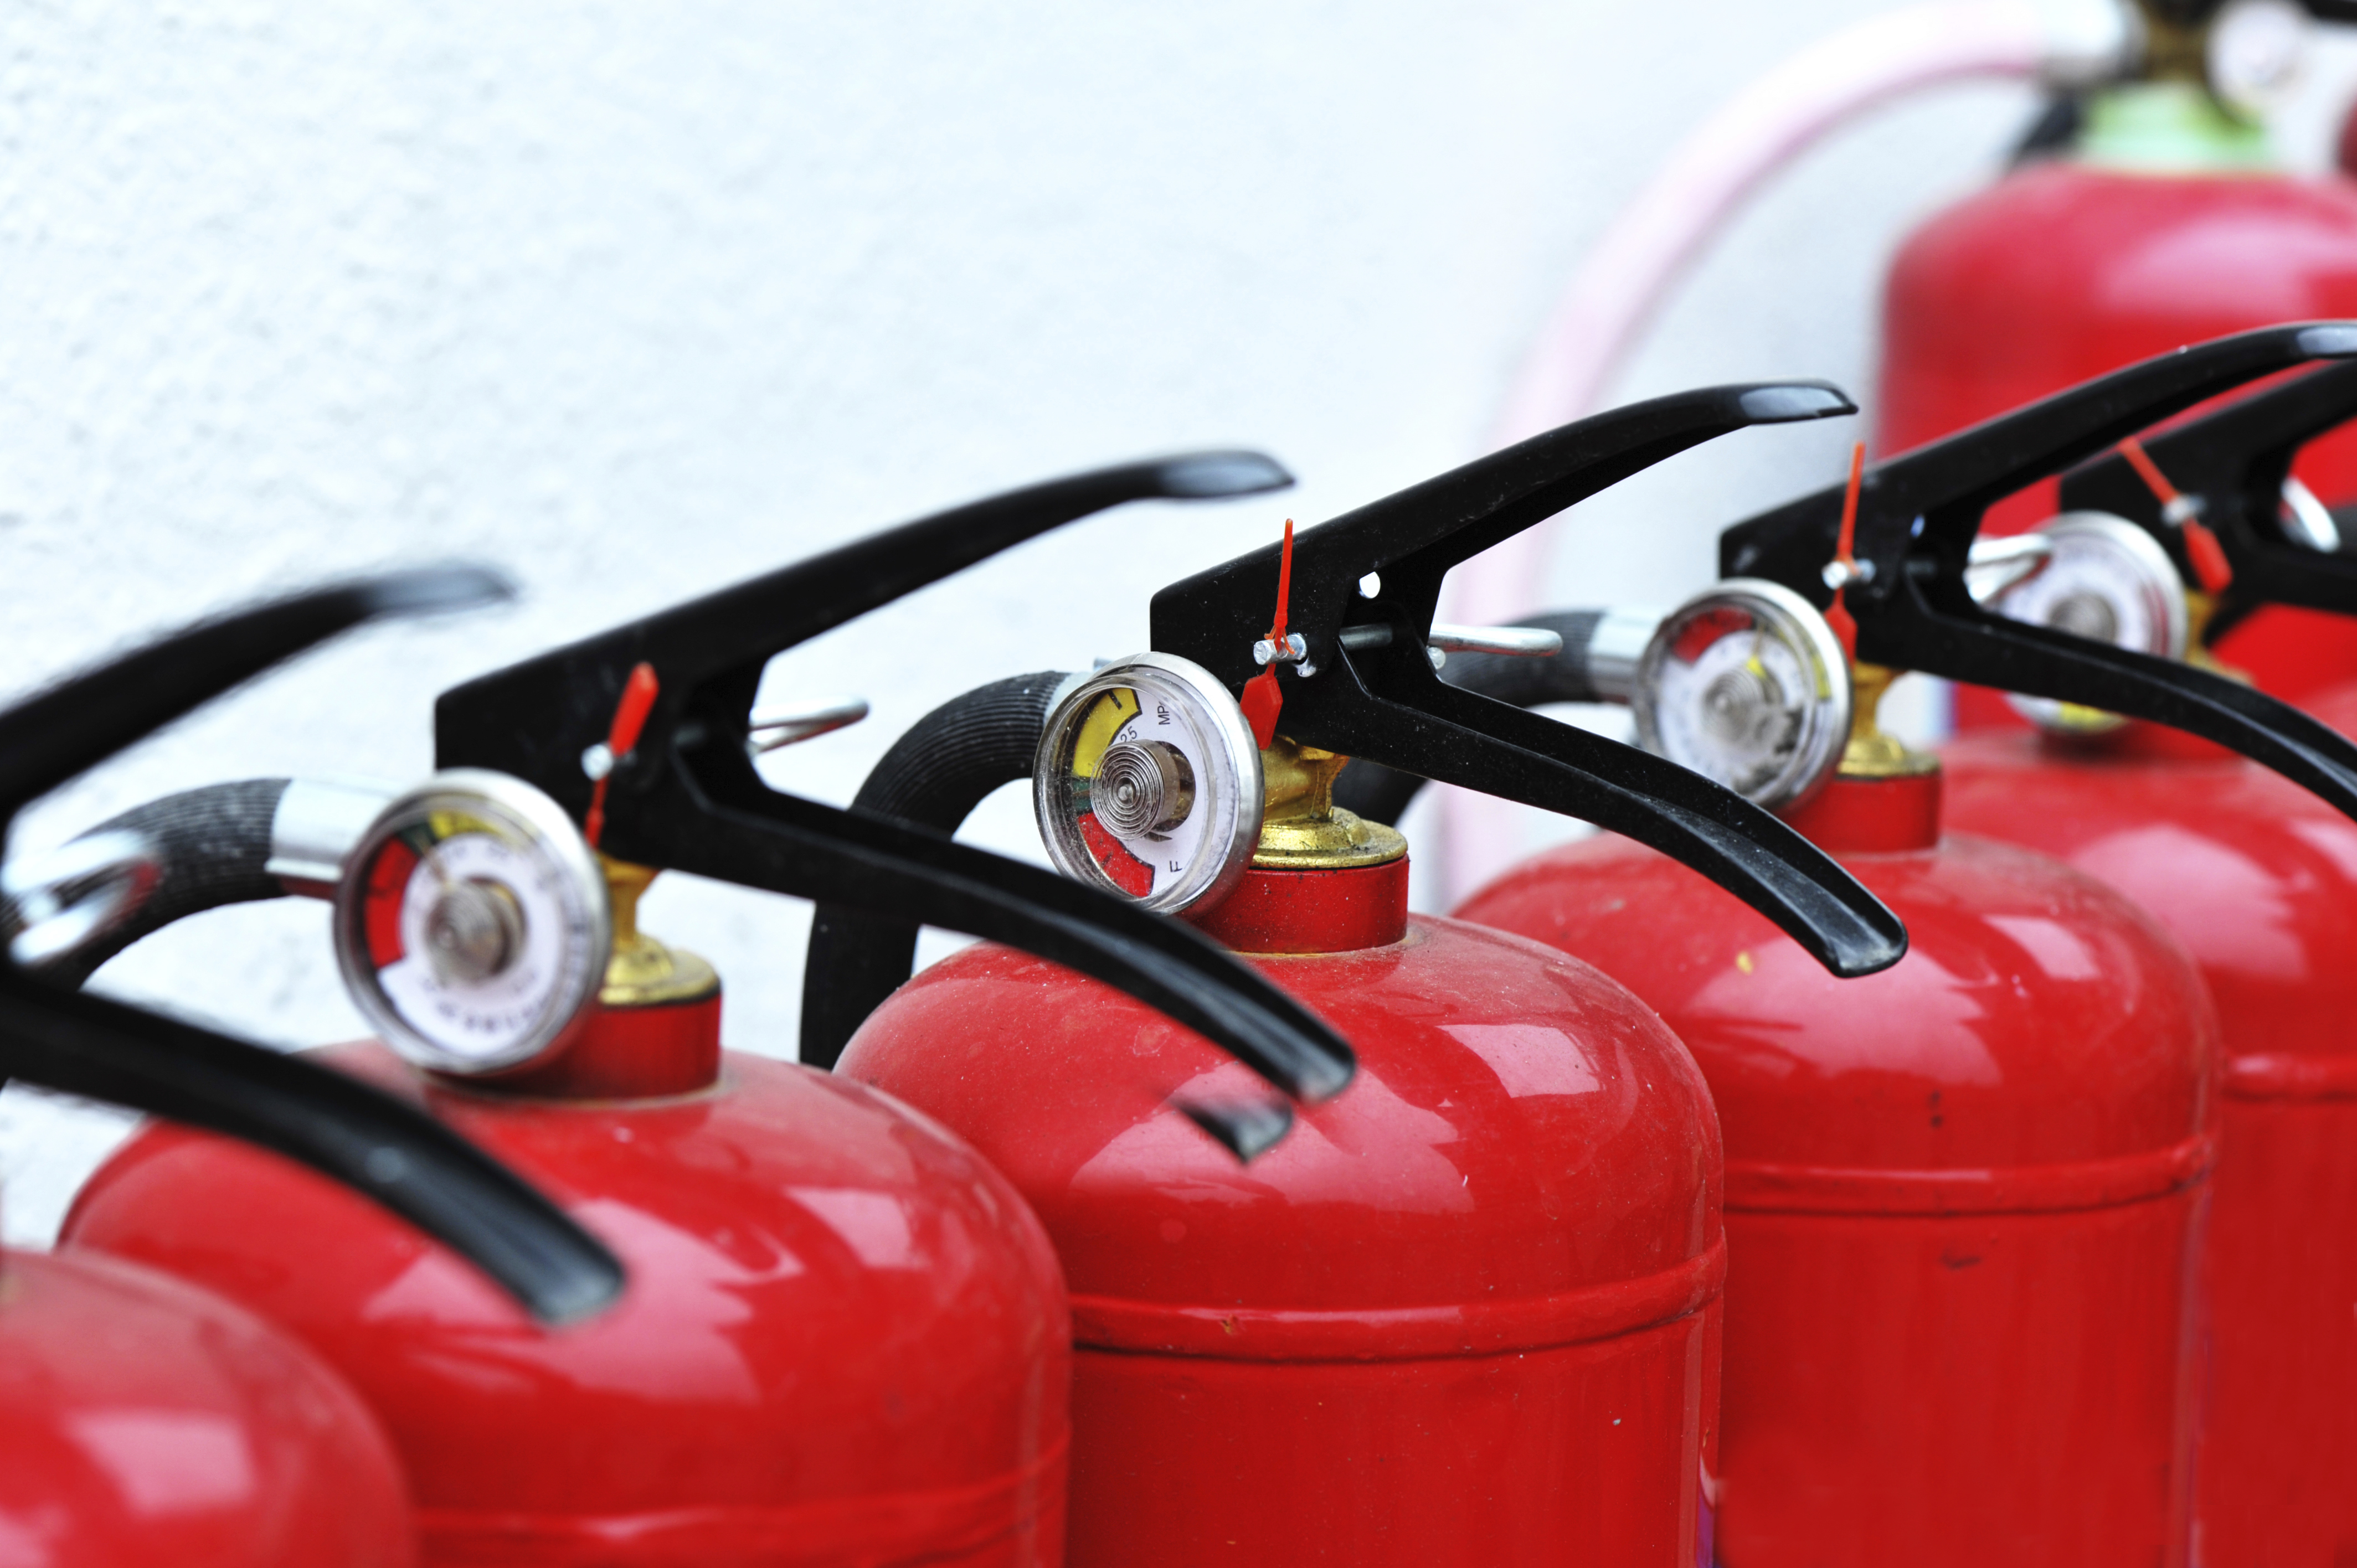 When Should You Use a Fire Extinguisher? - Fireline